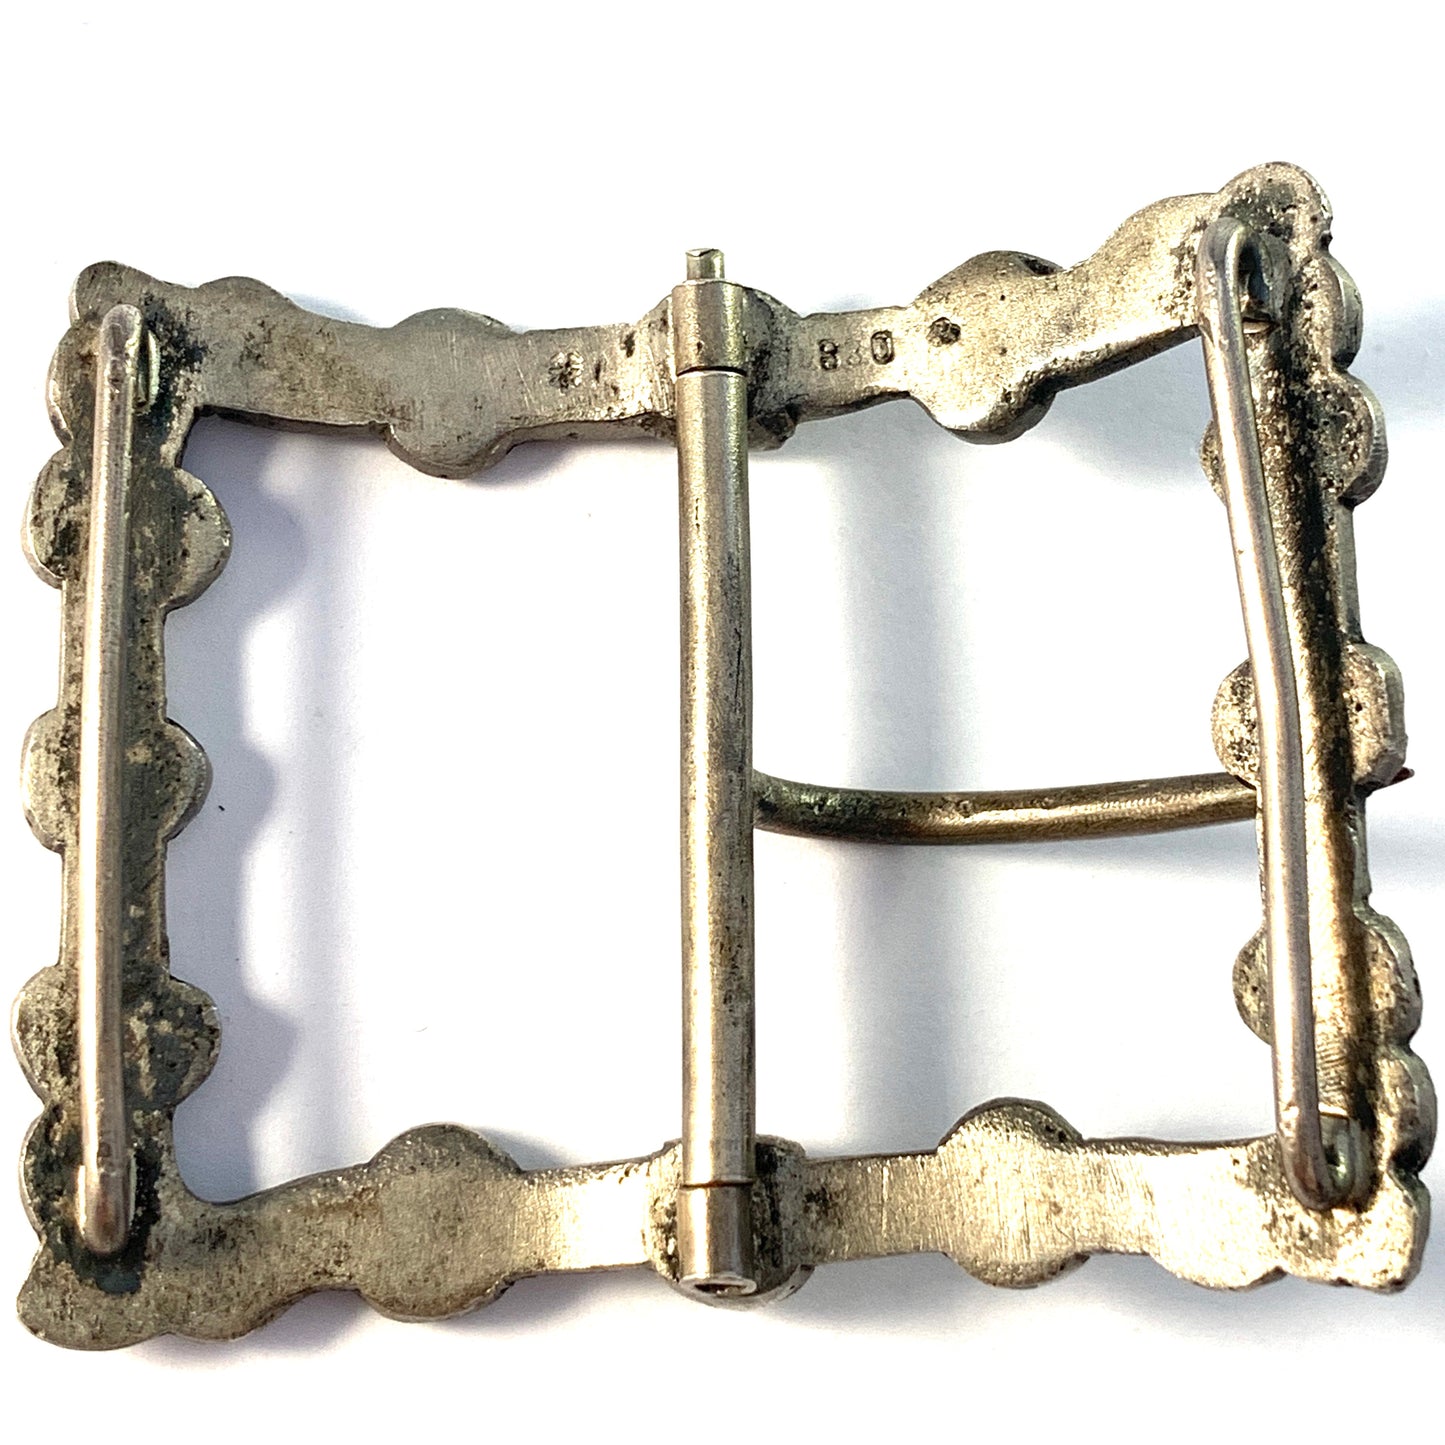 Clement Berg, Norway c year 1900. Solid 830 Silver Belt Buckle.